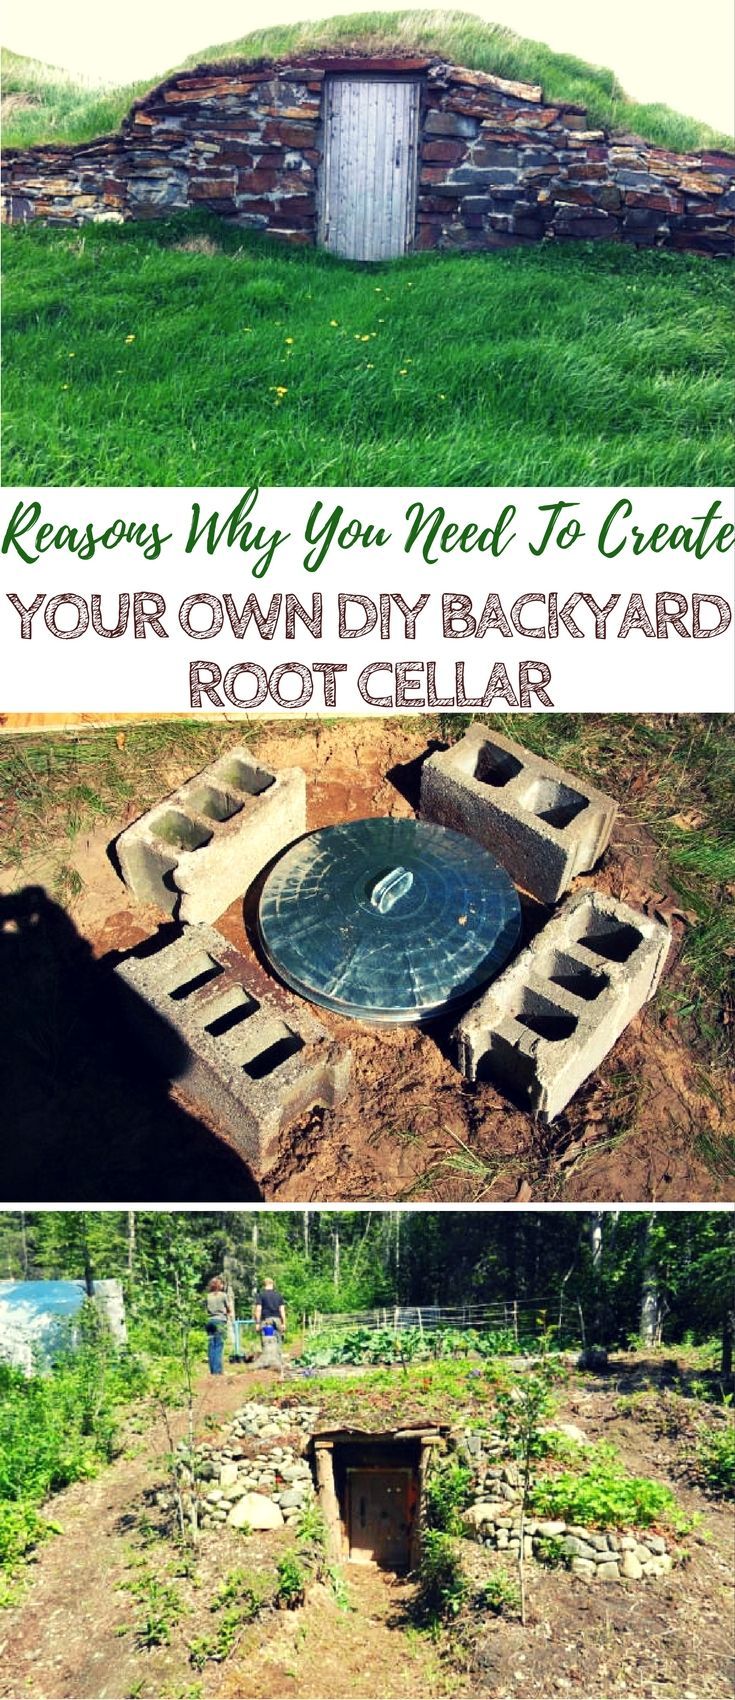 The Unbelievable Reasons Why You Need To Create Your Own DIY Backyard Root Cellar